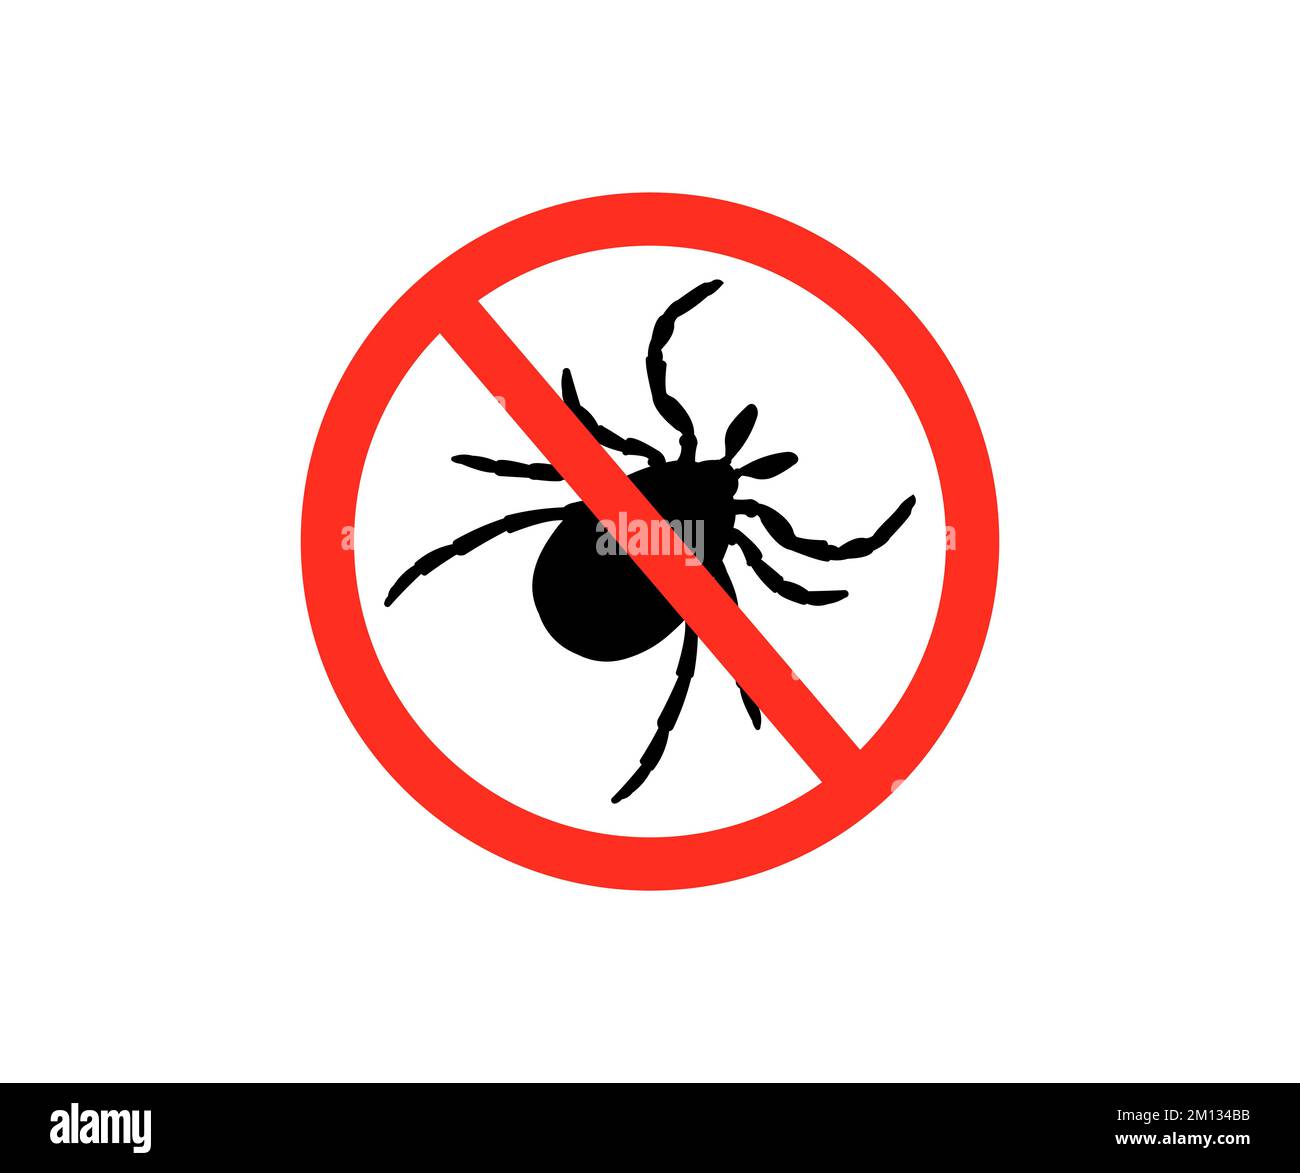 Anti pest control ban, stop insects logo design.No, prohibit signs dermanyssus gallinae, mite. Red european forest mite, parasite insect, infection. Stock Vector